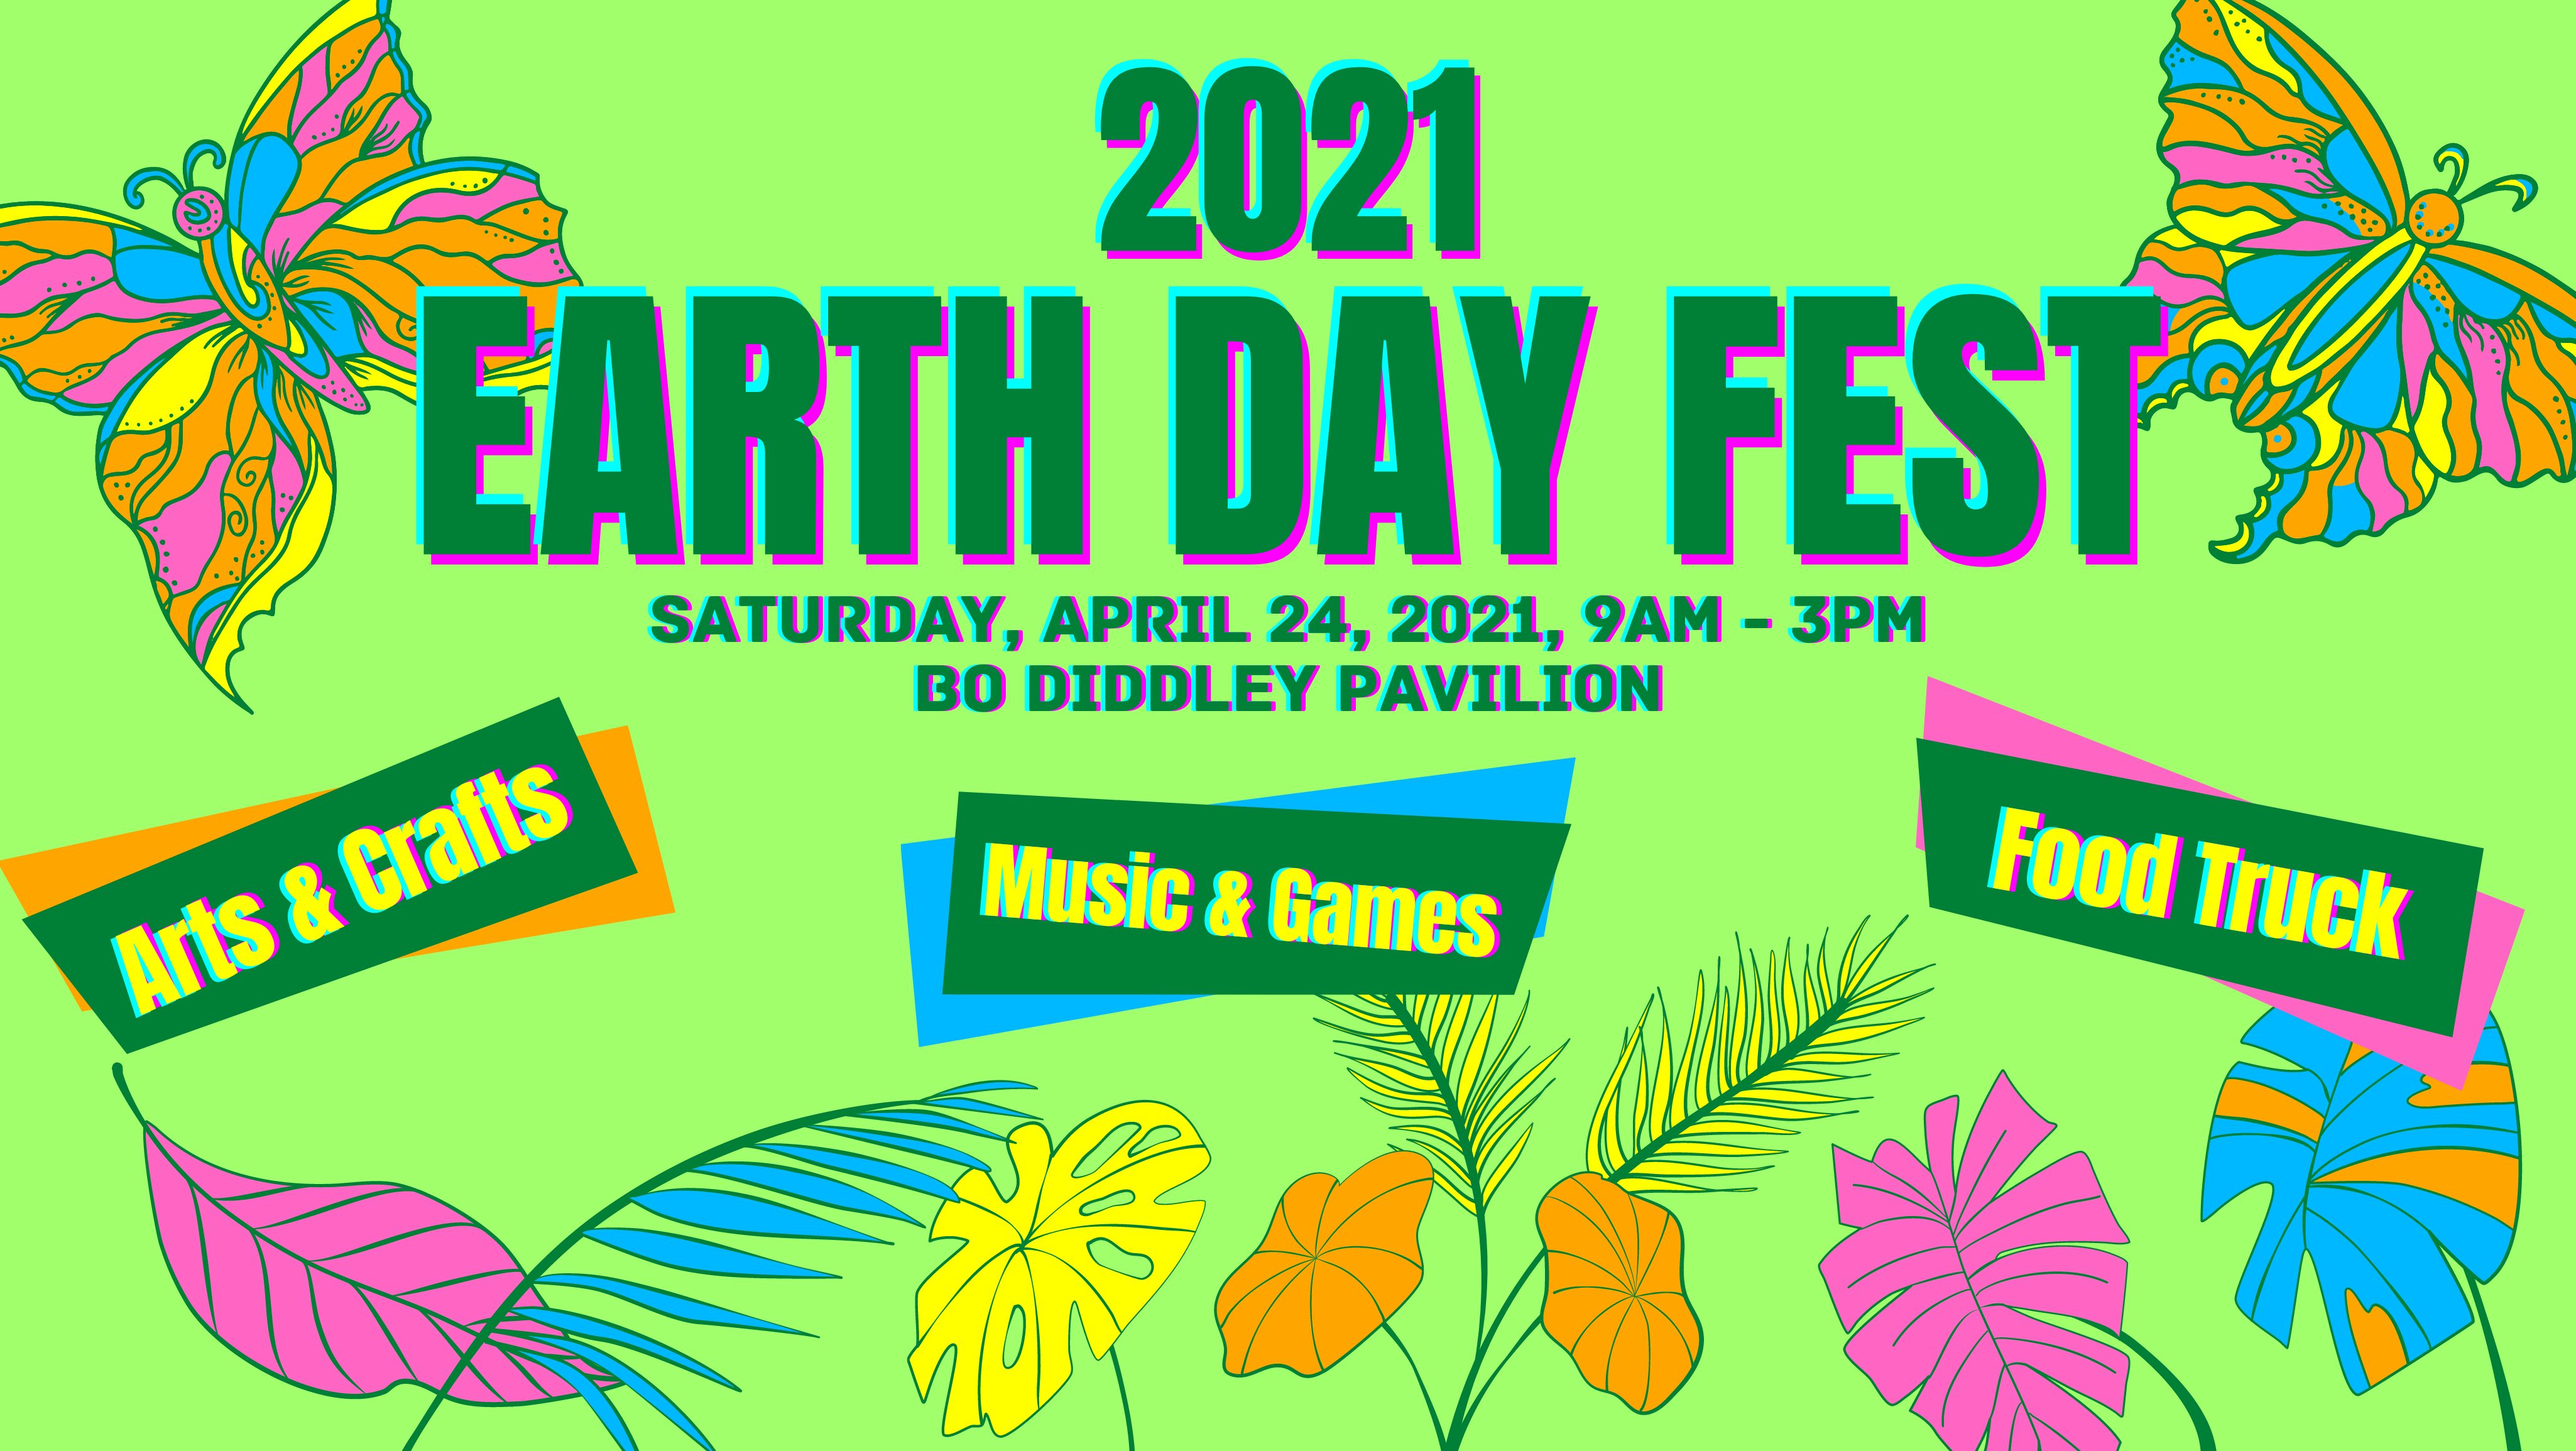 Thumbnail for the post titled: 2021 Earth Day Fest